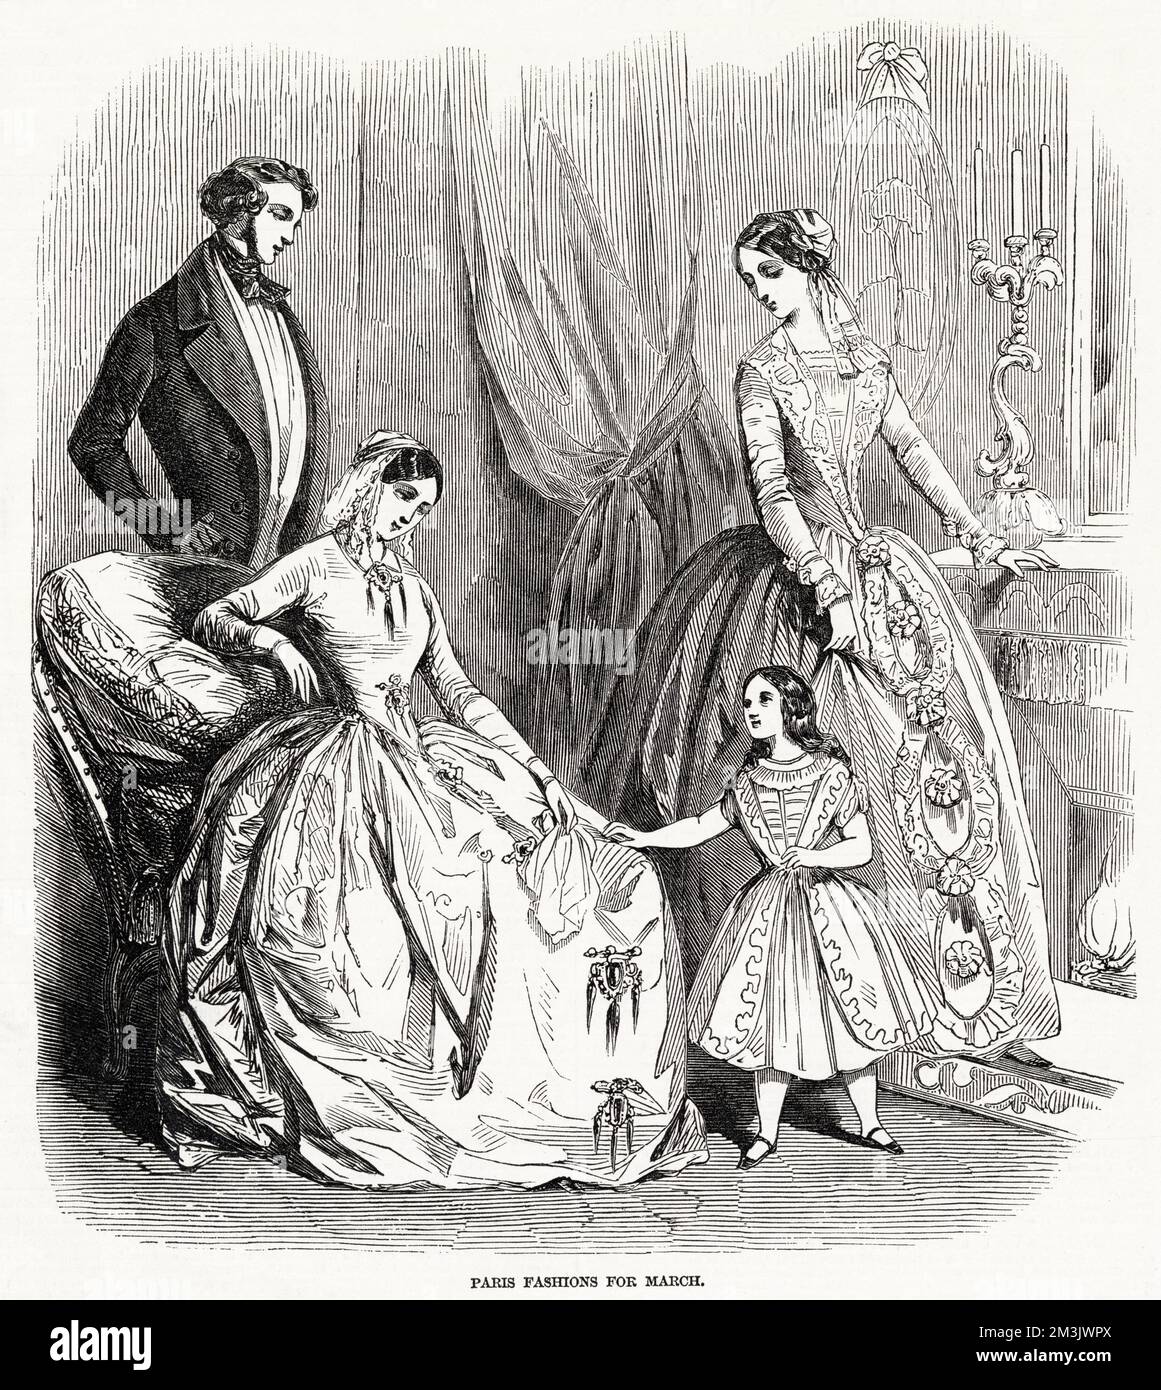 A sketch showing the Easter fashions from Paris couturiers, 1847.   From left: A lace head dress and a robe of taffeta, d'italie rose and trimmed with ribbon.   The second dress is blue with black satin flowers and trimmed in front with lace flowers. Stock Photo